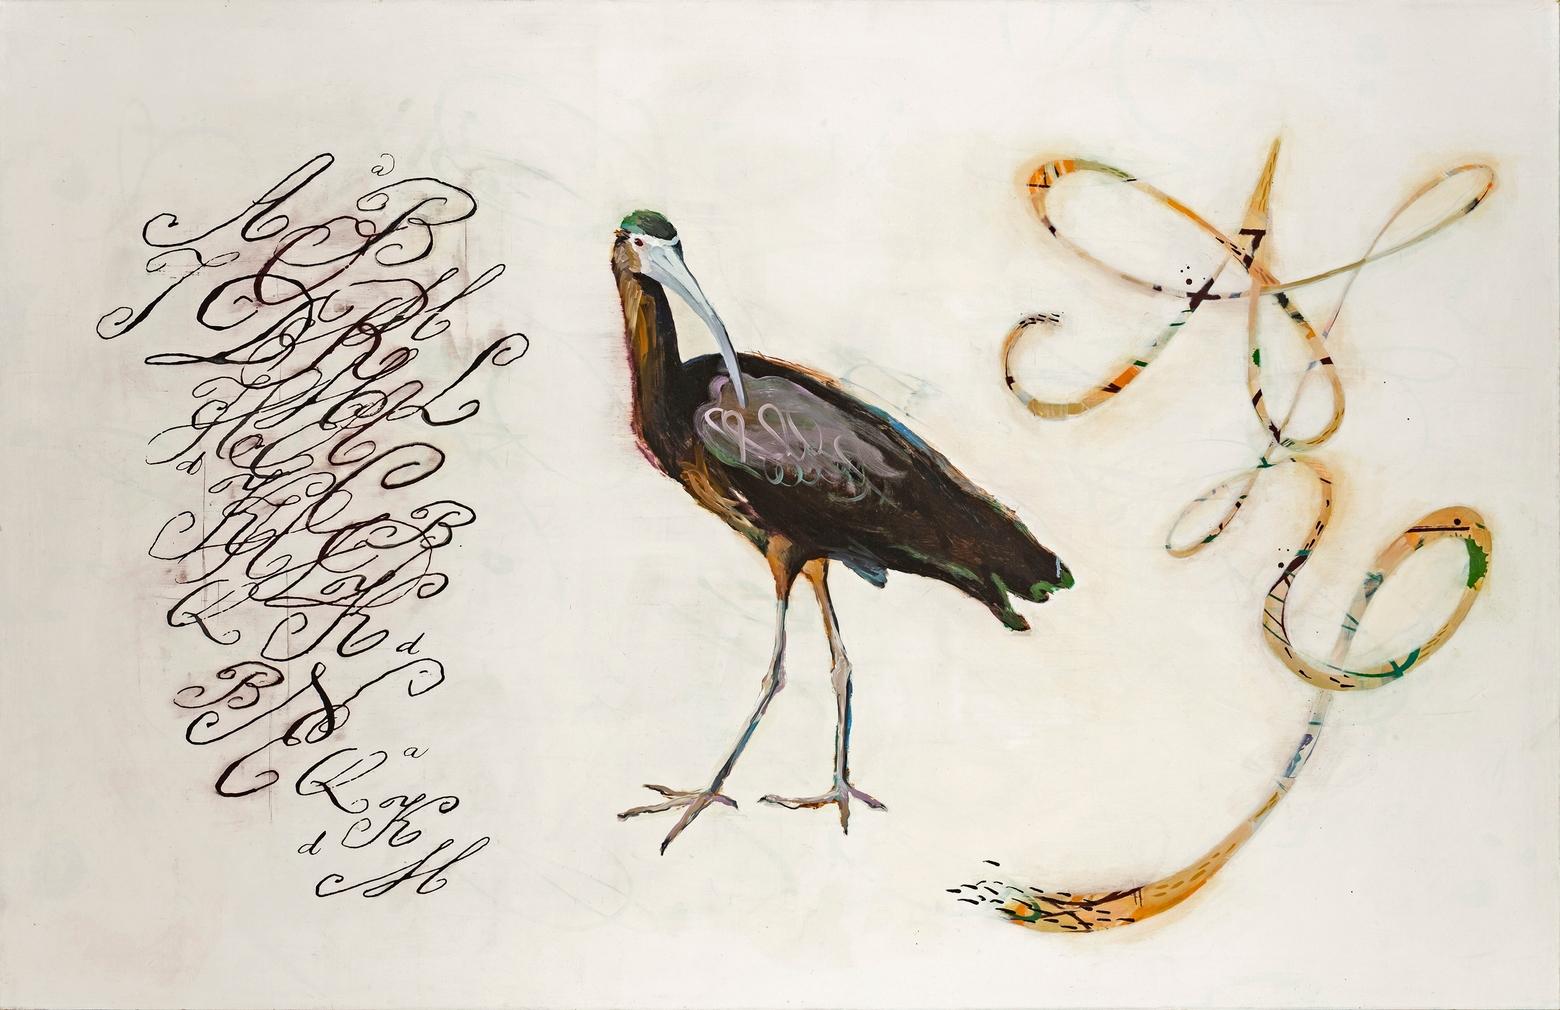 "Specimens (with Ibis)," a work that speaks to Courtenaye's fascination with the soothing curvilinear parallels between avian forms and the stylized penmanship that was its own art form in letters, field journals and documents of the past.  